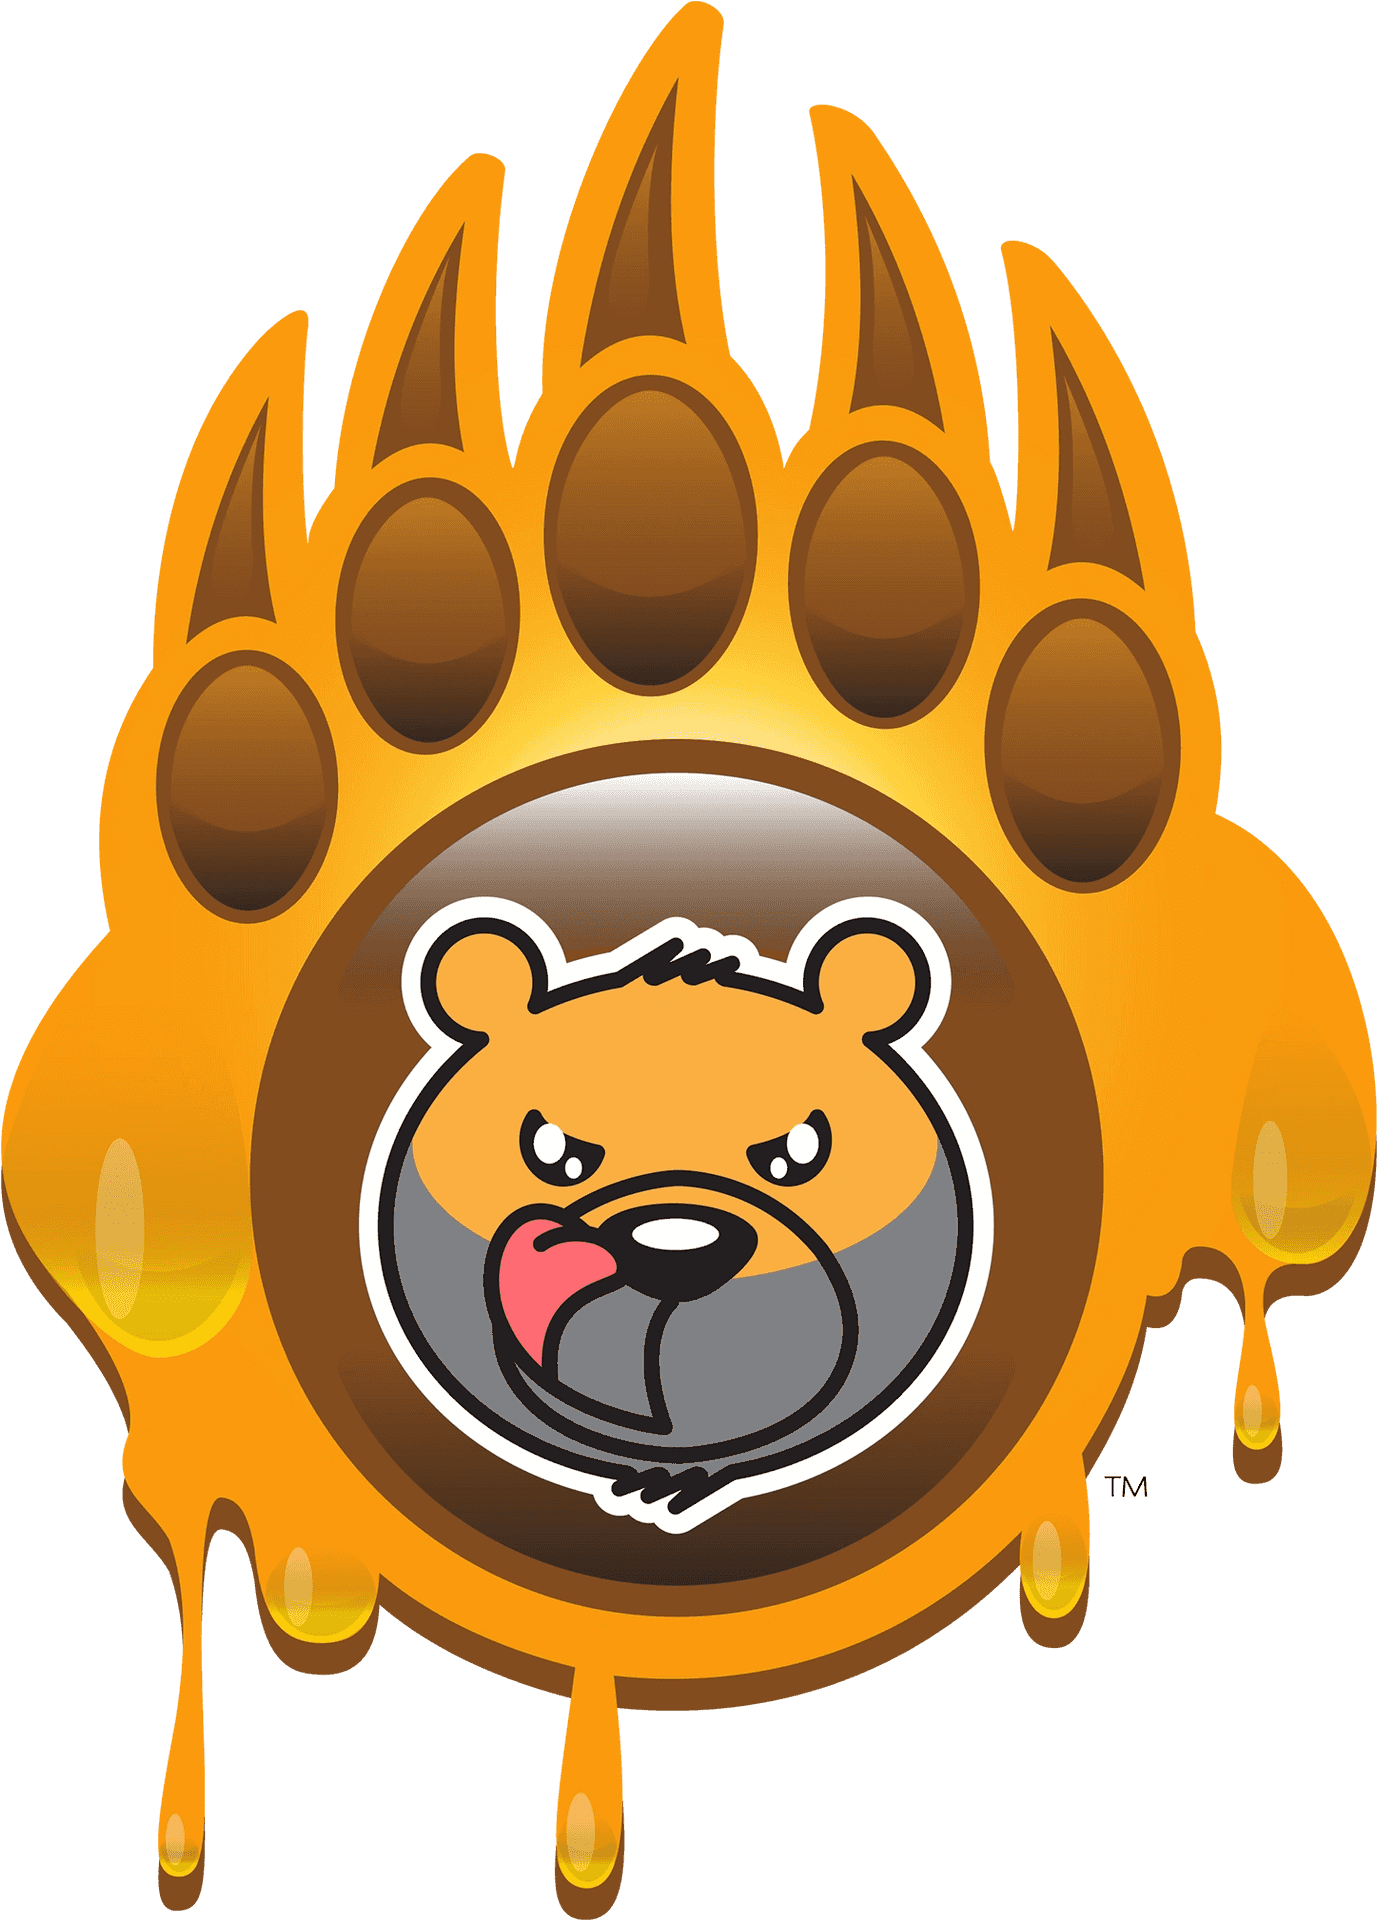 Bear Logowith Melting Paw Print PNG image